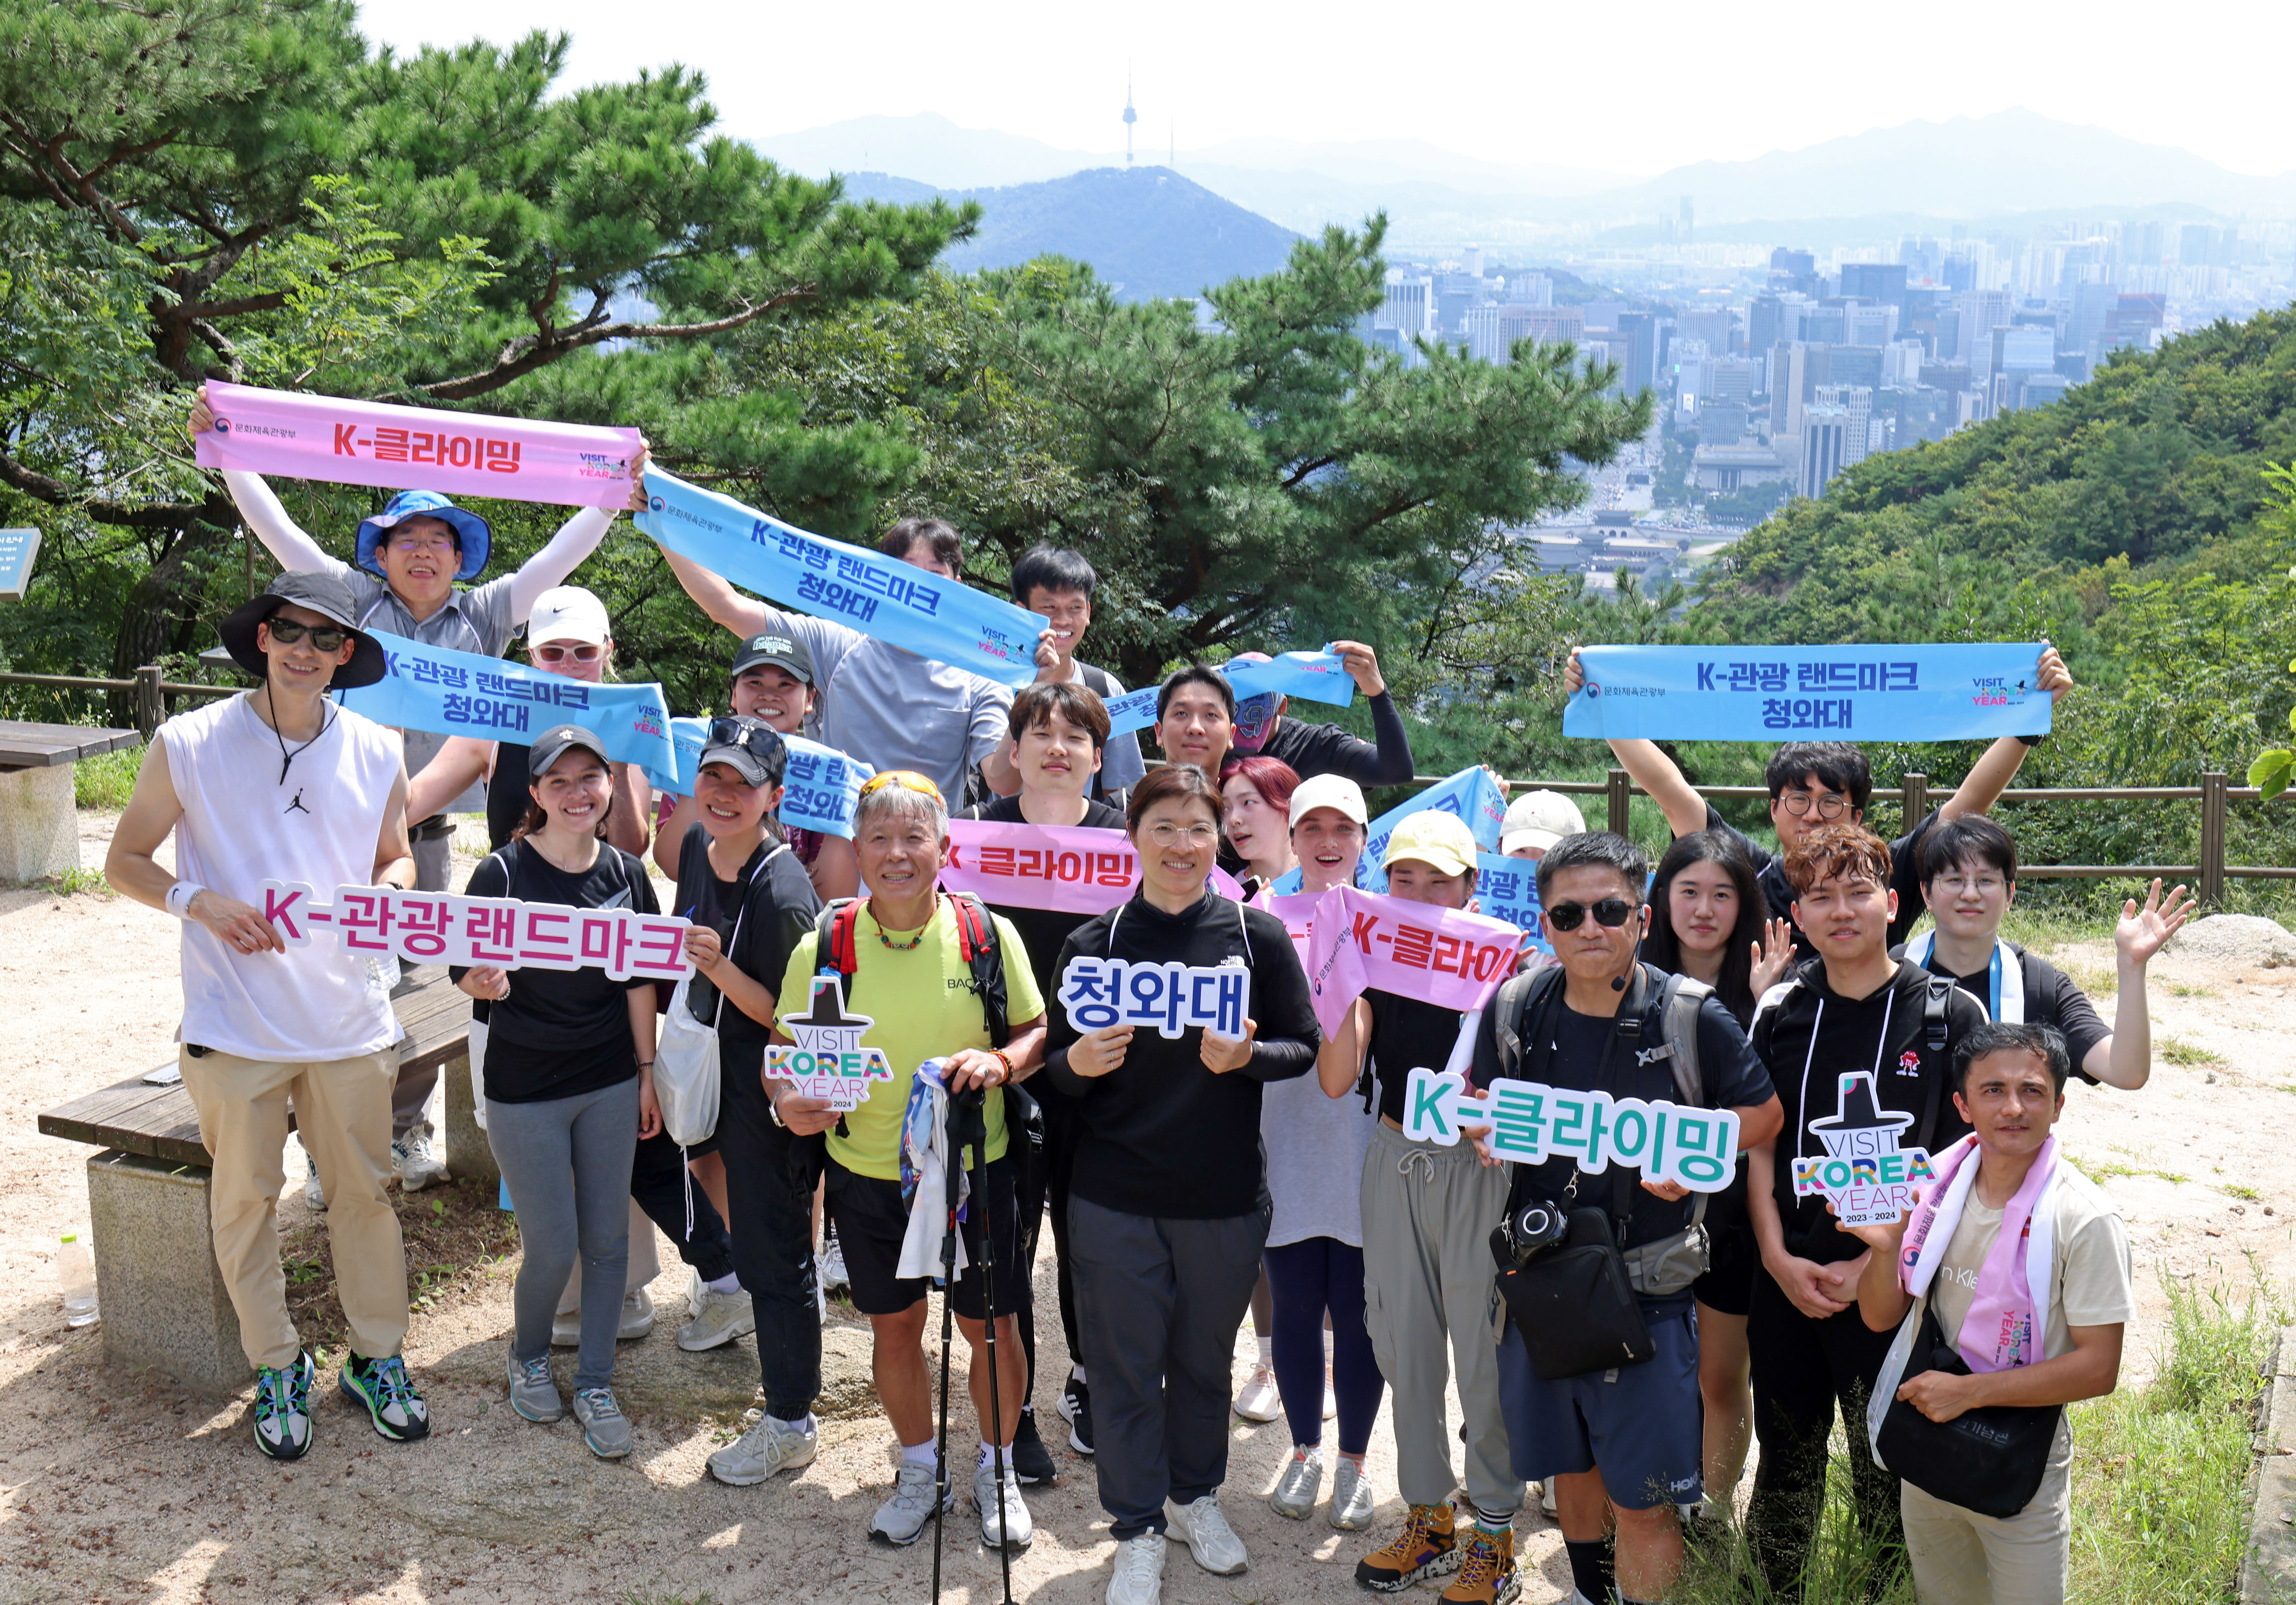 The group of some 20 hikers on Sept. 5 pose for a group photo after reaching Cheong Wa Dae Observatory.